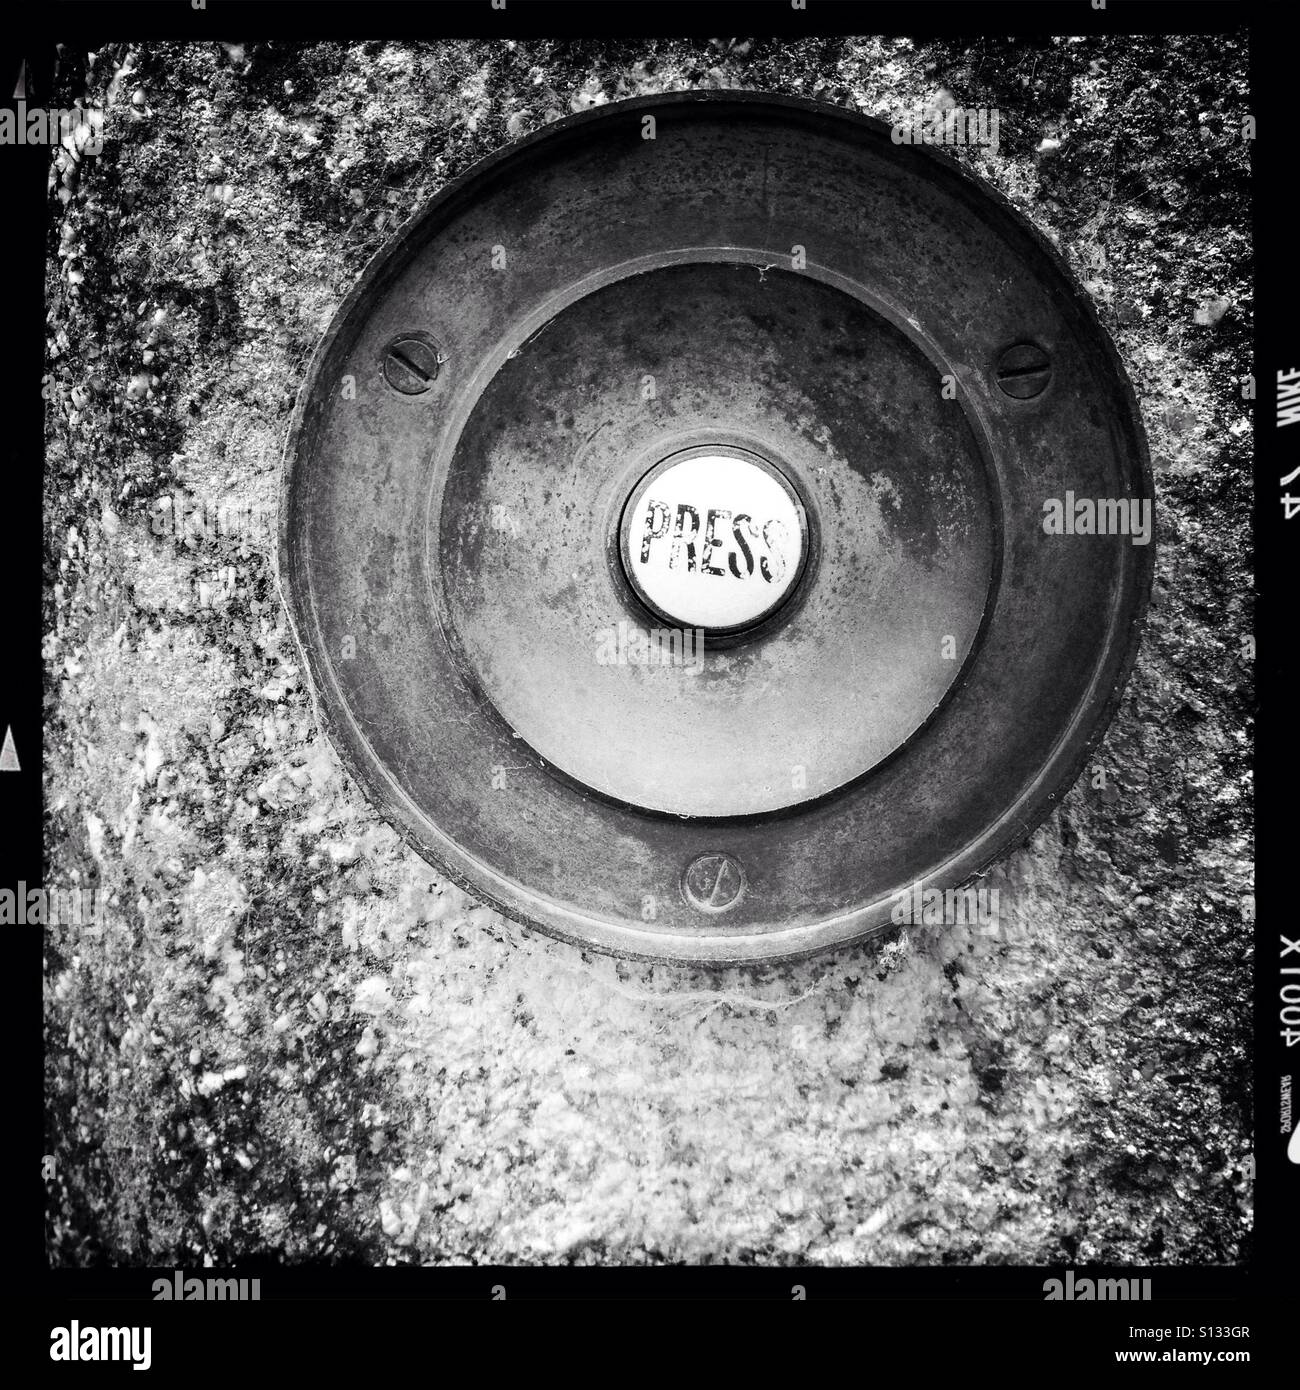 An old style front door bell. Stock Photo